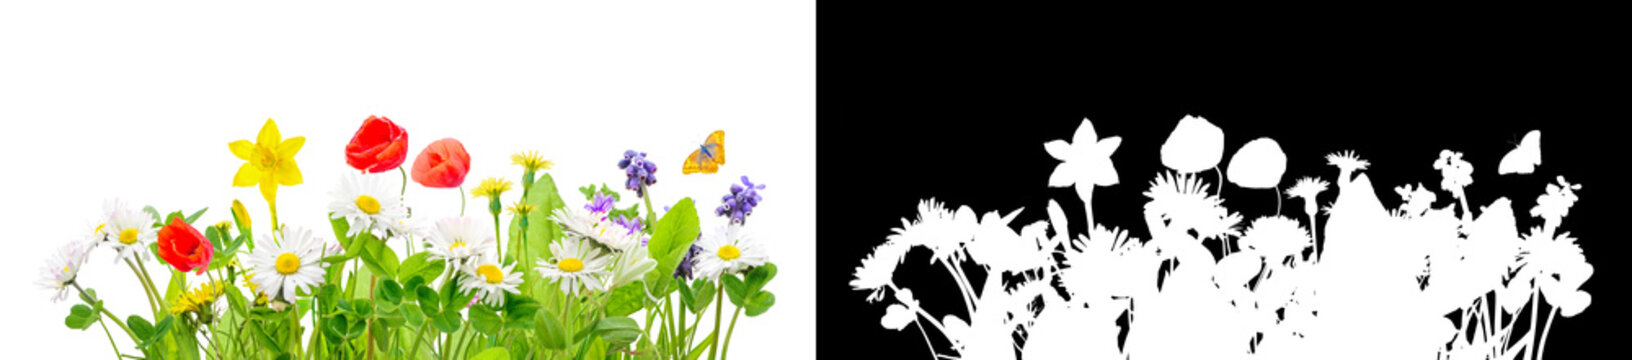 spring grass and daisy wildflowers isolated with clipping path and alpha channel